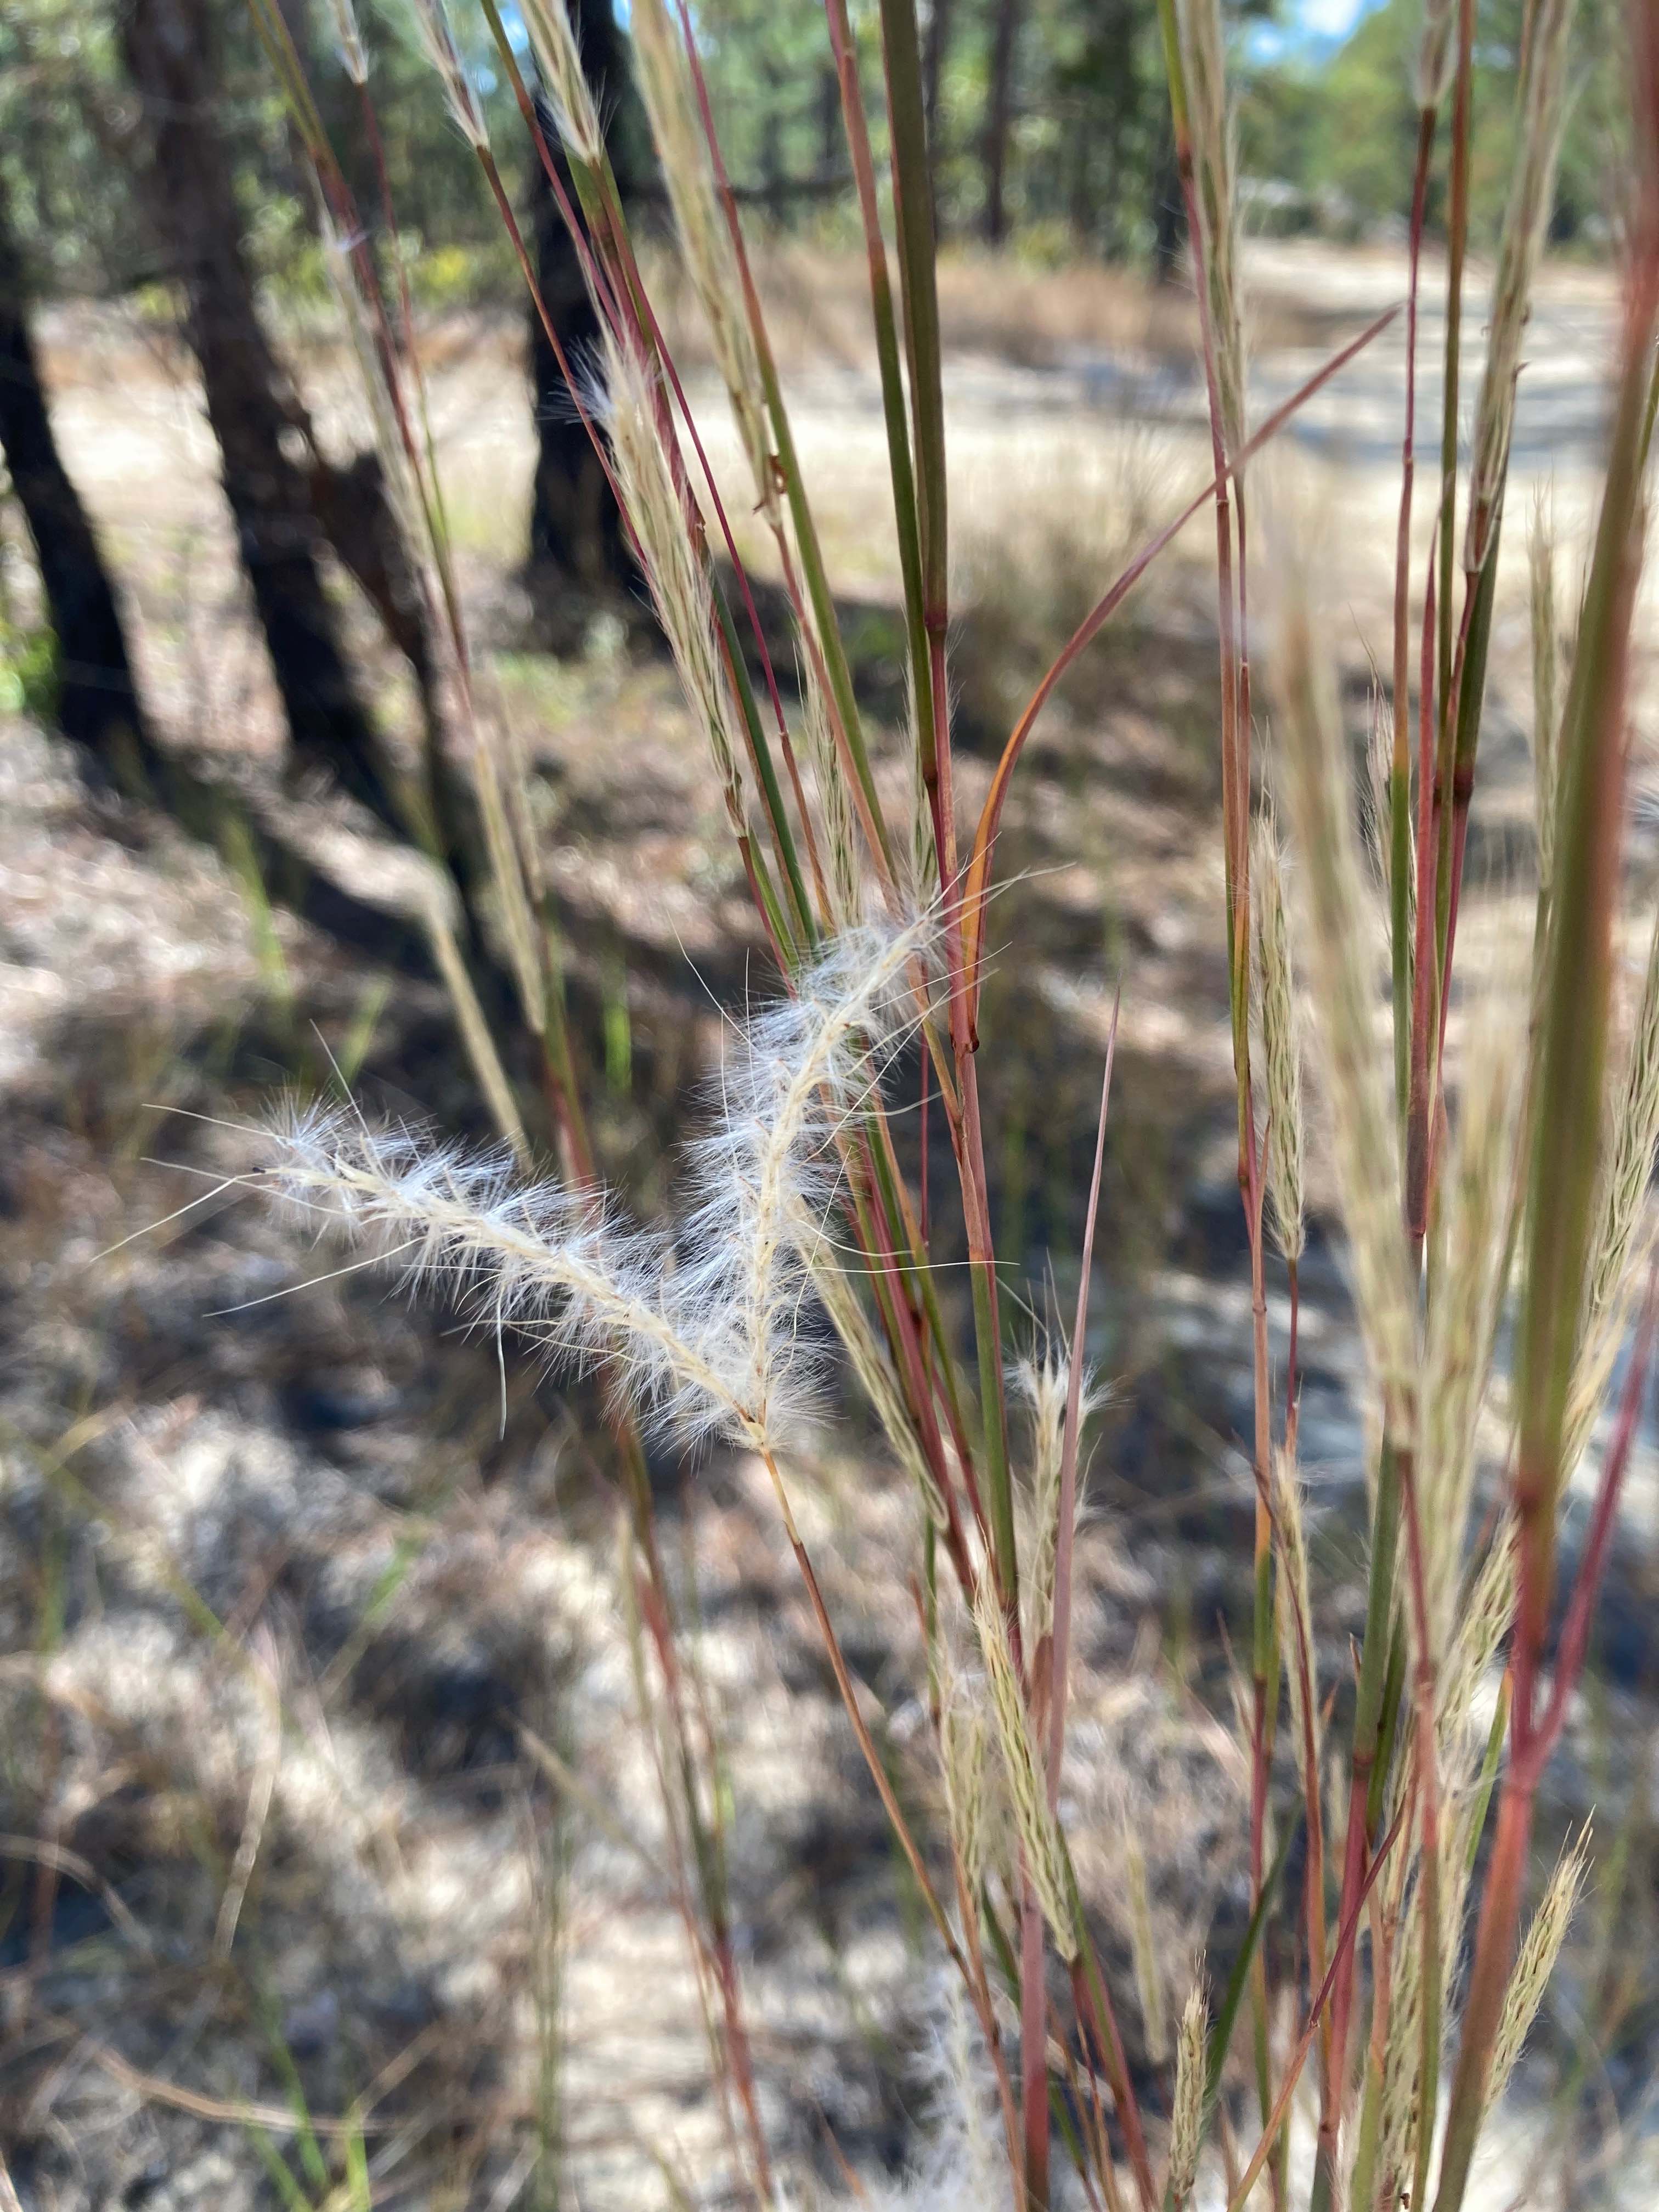 The Scientific Name is Andropogon ternarius. You will likely hear them called Splitbeard Bluestem, Bunchgrass, Silver Bluestem, Split Bluestem. This picture shows the The pairs of feathery racemes become more separated as the fruits mature. The spikelets have very long, silvery hairs. of Andropogon ternarius